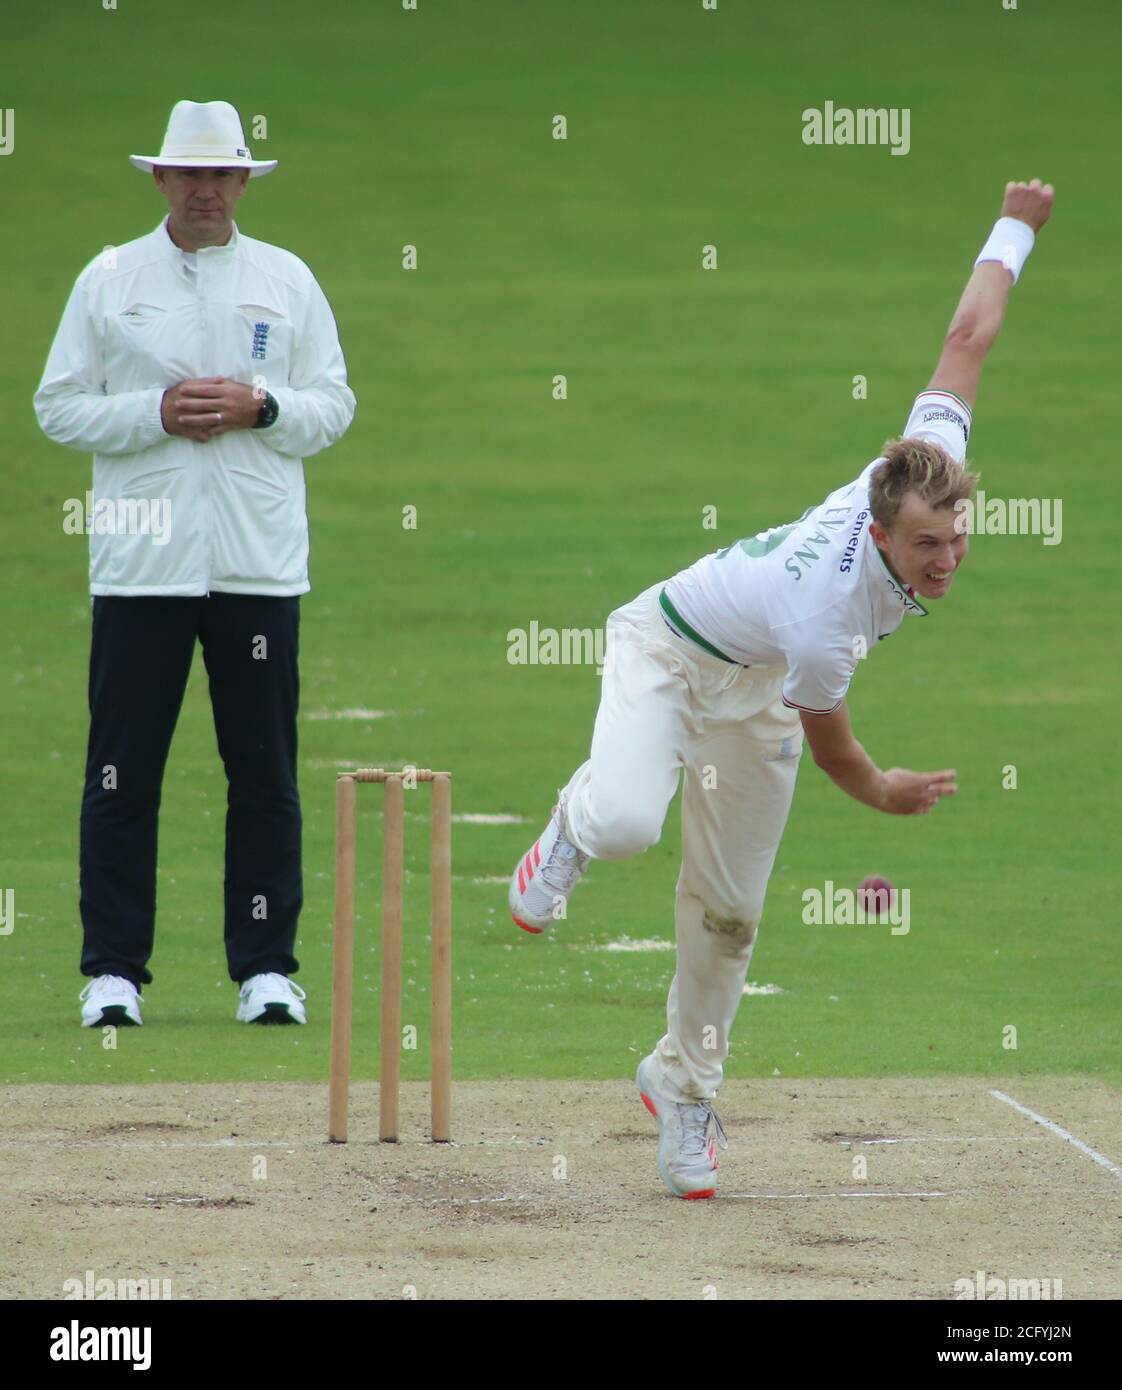 Leeds, UK. 08th Sep, 2020. Yorkshire County Cricket, Emerald Headingley Stadium, Leeds, West Yorkshire, 8th September 2020. Bob Willis Trophy - Yorkshire County Cricket Club vs Leicestershire County Cricket Club, Day 3. Alex Evans of Leicestershire bowling. Credit: Touchlinepics/Alamy Live News Stock Photo